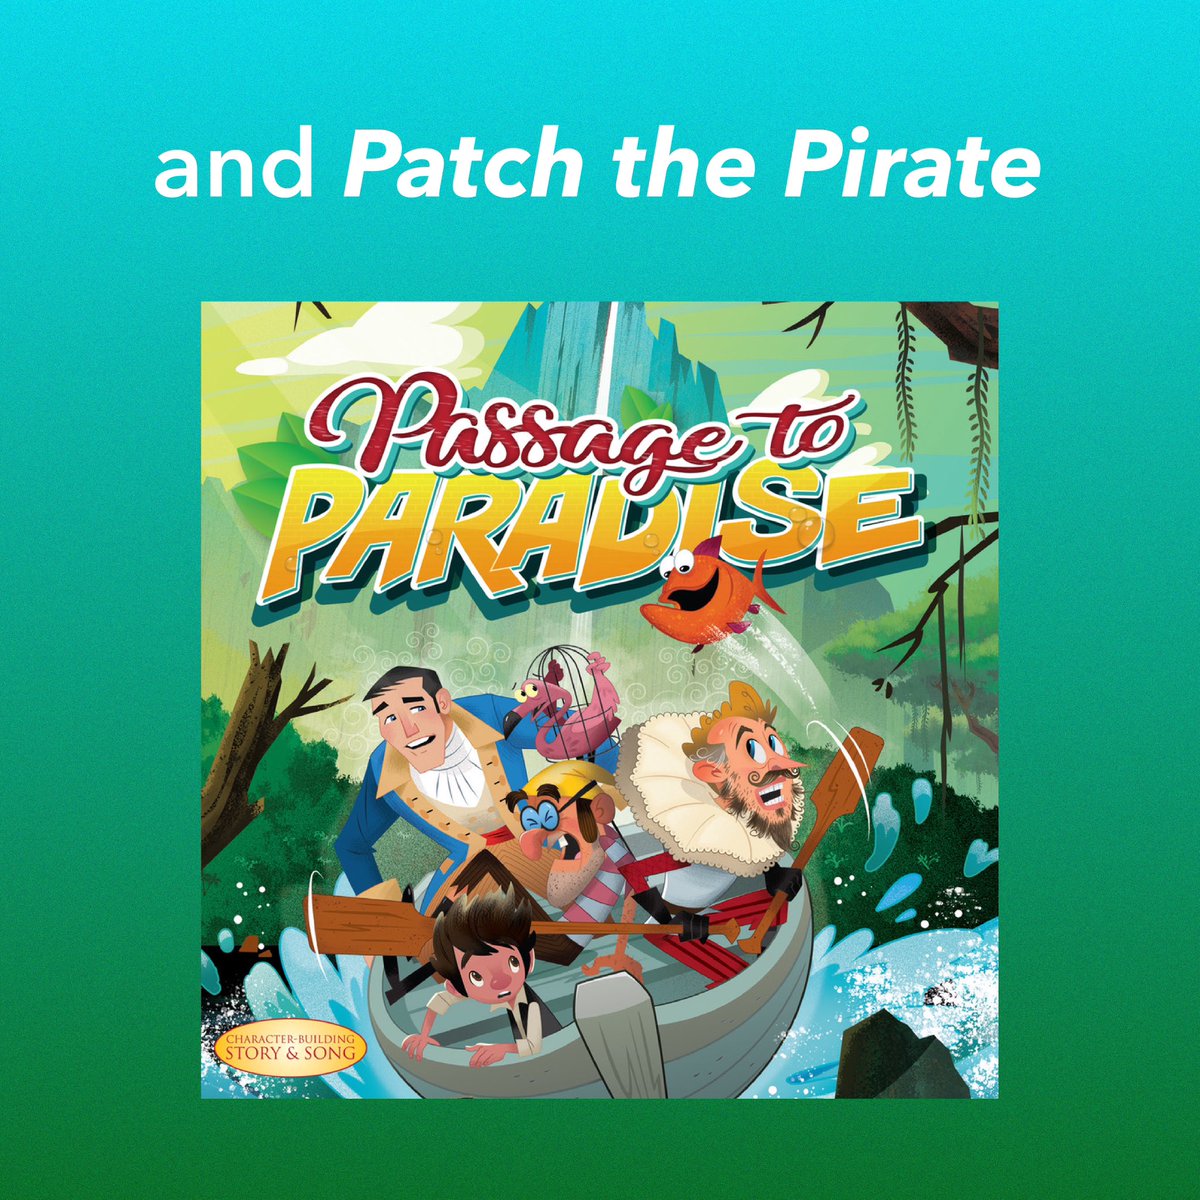 Start the new year with new music from Majesty Music and Patch the Pirate!
Listen today on the Patch Plus app or purchase CD and digital copies at MajestyMusic.com

#NewYear #NewMusic #MajestyMusic #PatchThePirate